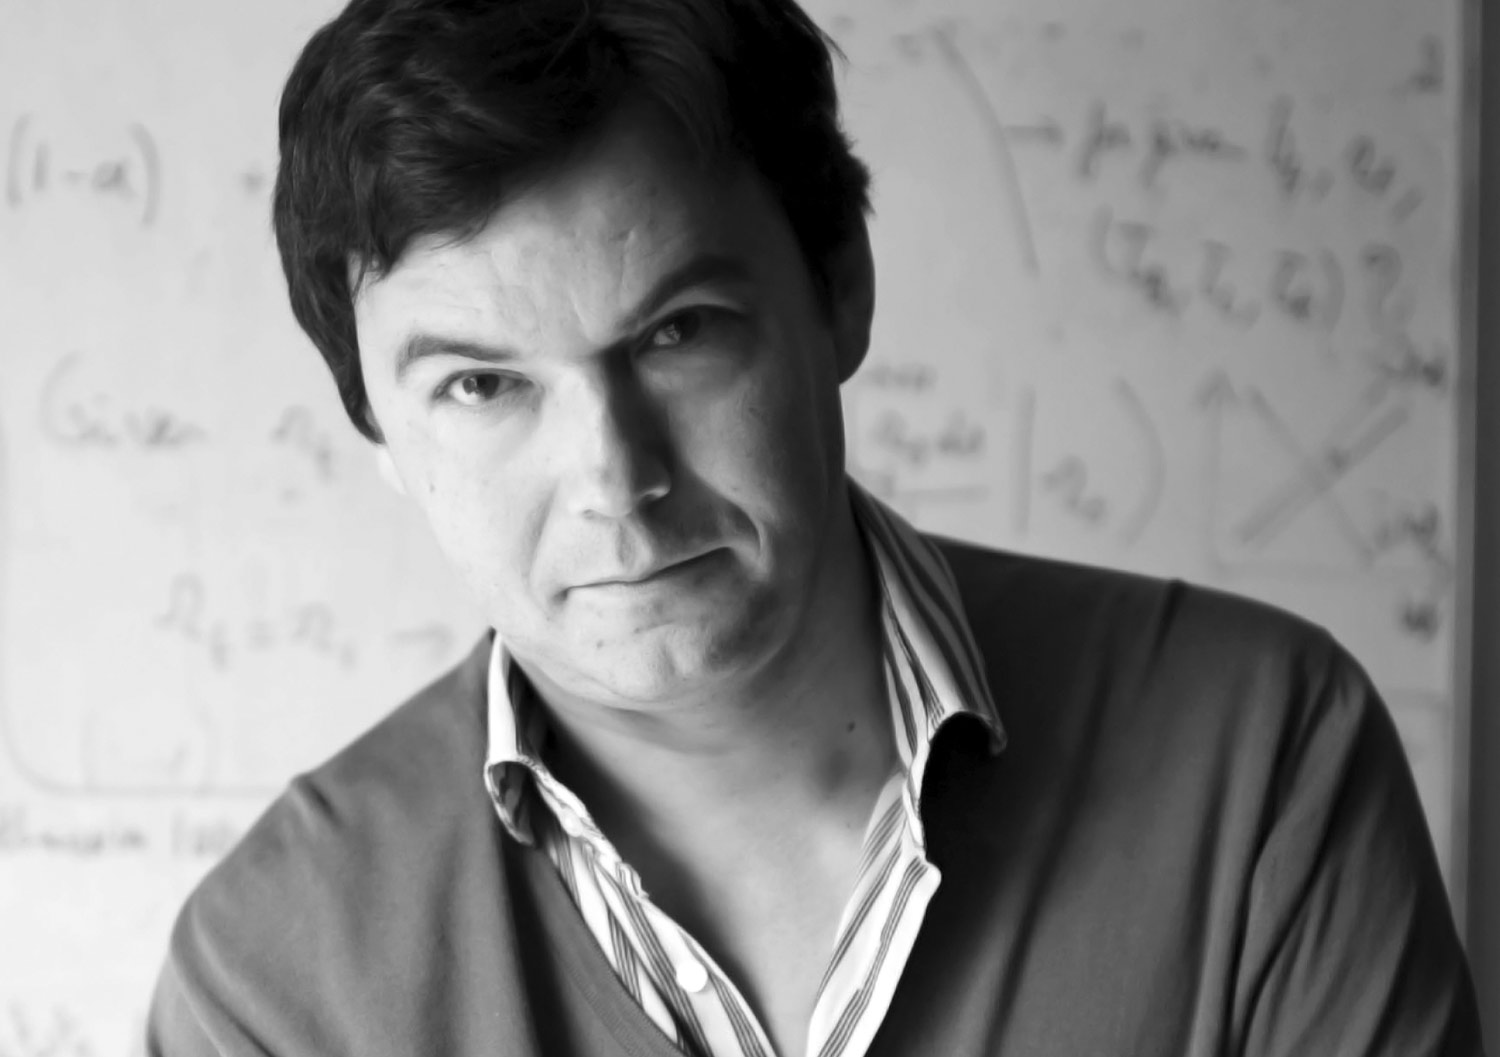 Thomas Piketty and Millennial Marxists on the Scourge of Inequality